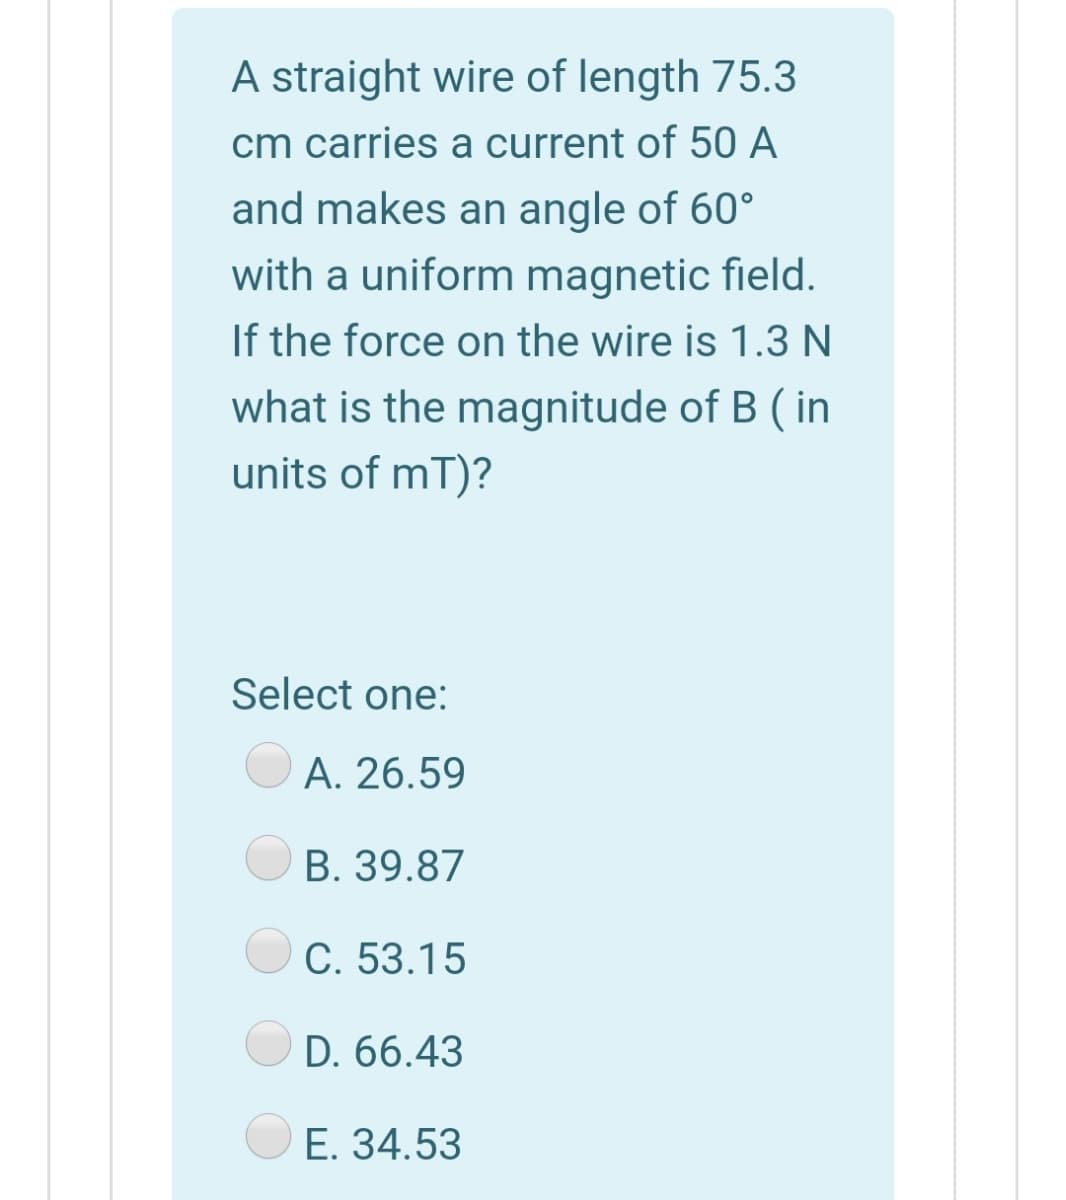 A straight wire of length 75.3
cm carries a current of 50 A
and makes an angle of 60°
with a uniform magnetic field.
If the force on the wire is 1.3 N
what is the magnitude of B ( in
units of mT)?
Select one:
A. 26.59
B. 39.87
C. 53.15
D. 66.43
E. 34.53
